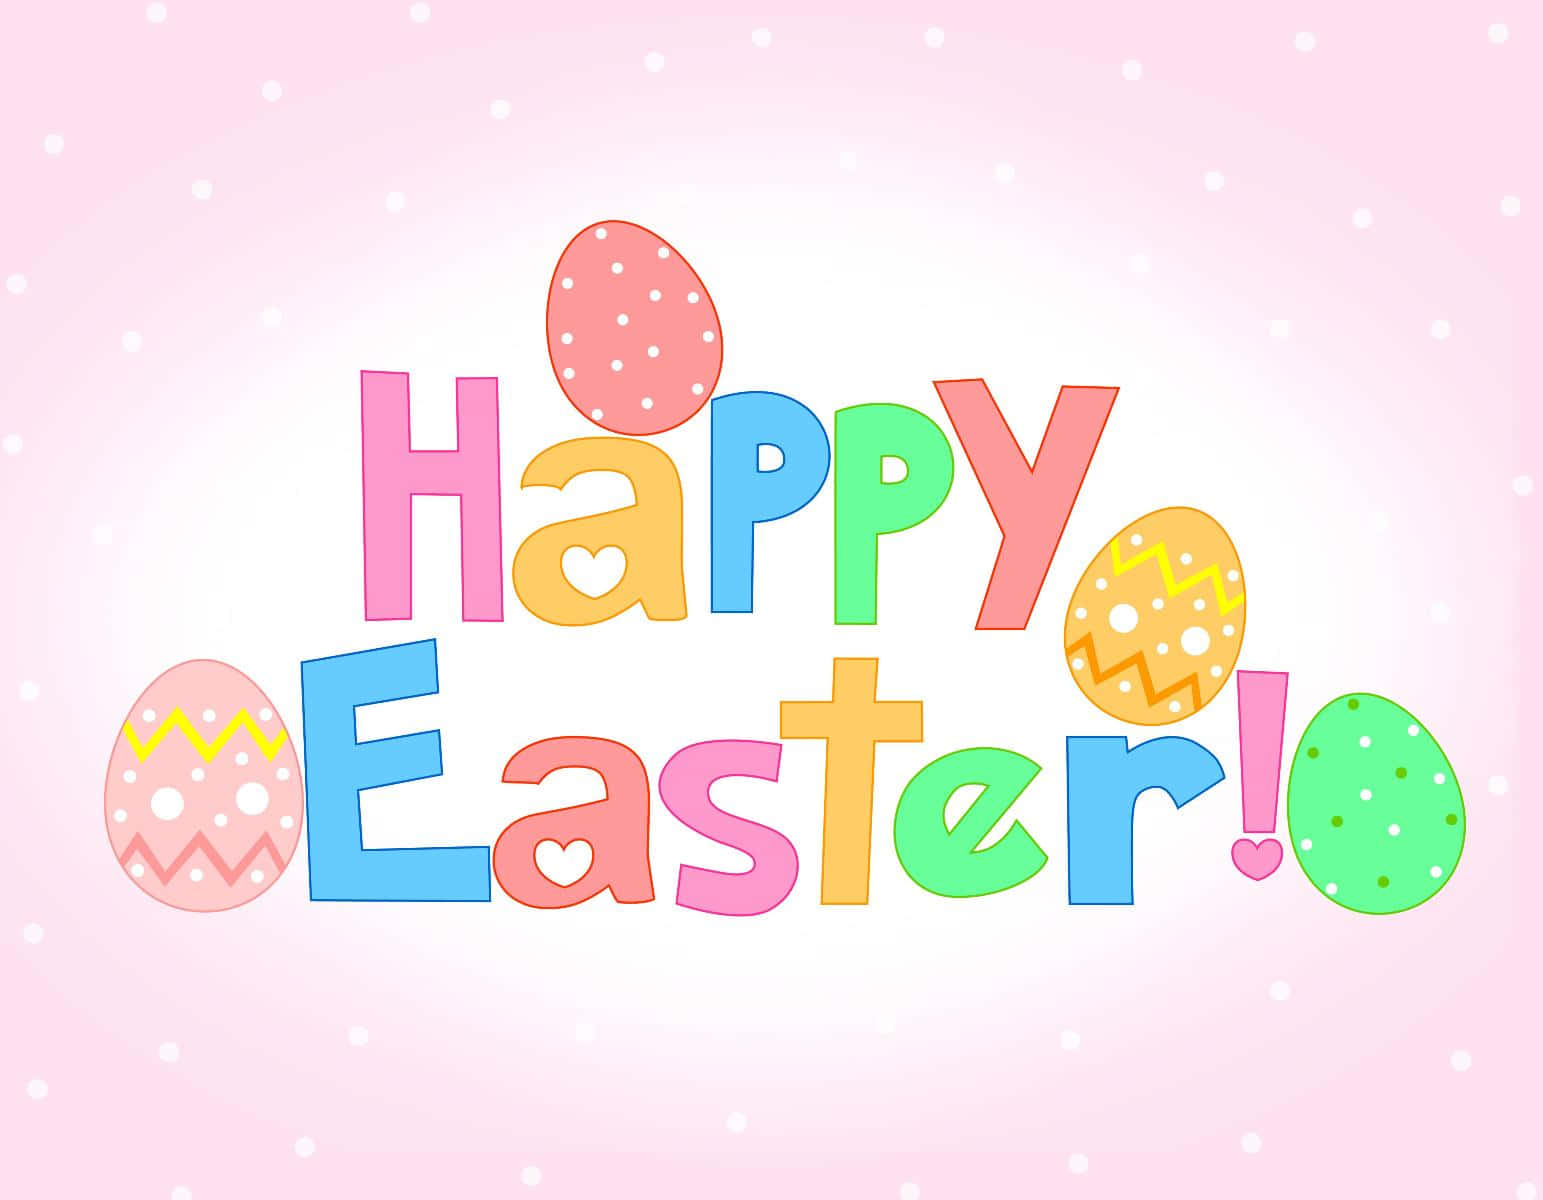 Celebrate Easter with a festive, pastel-colored background